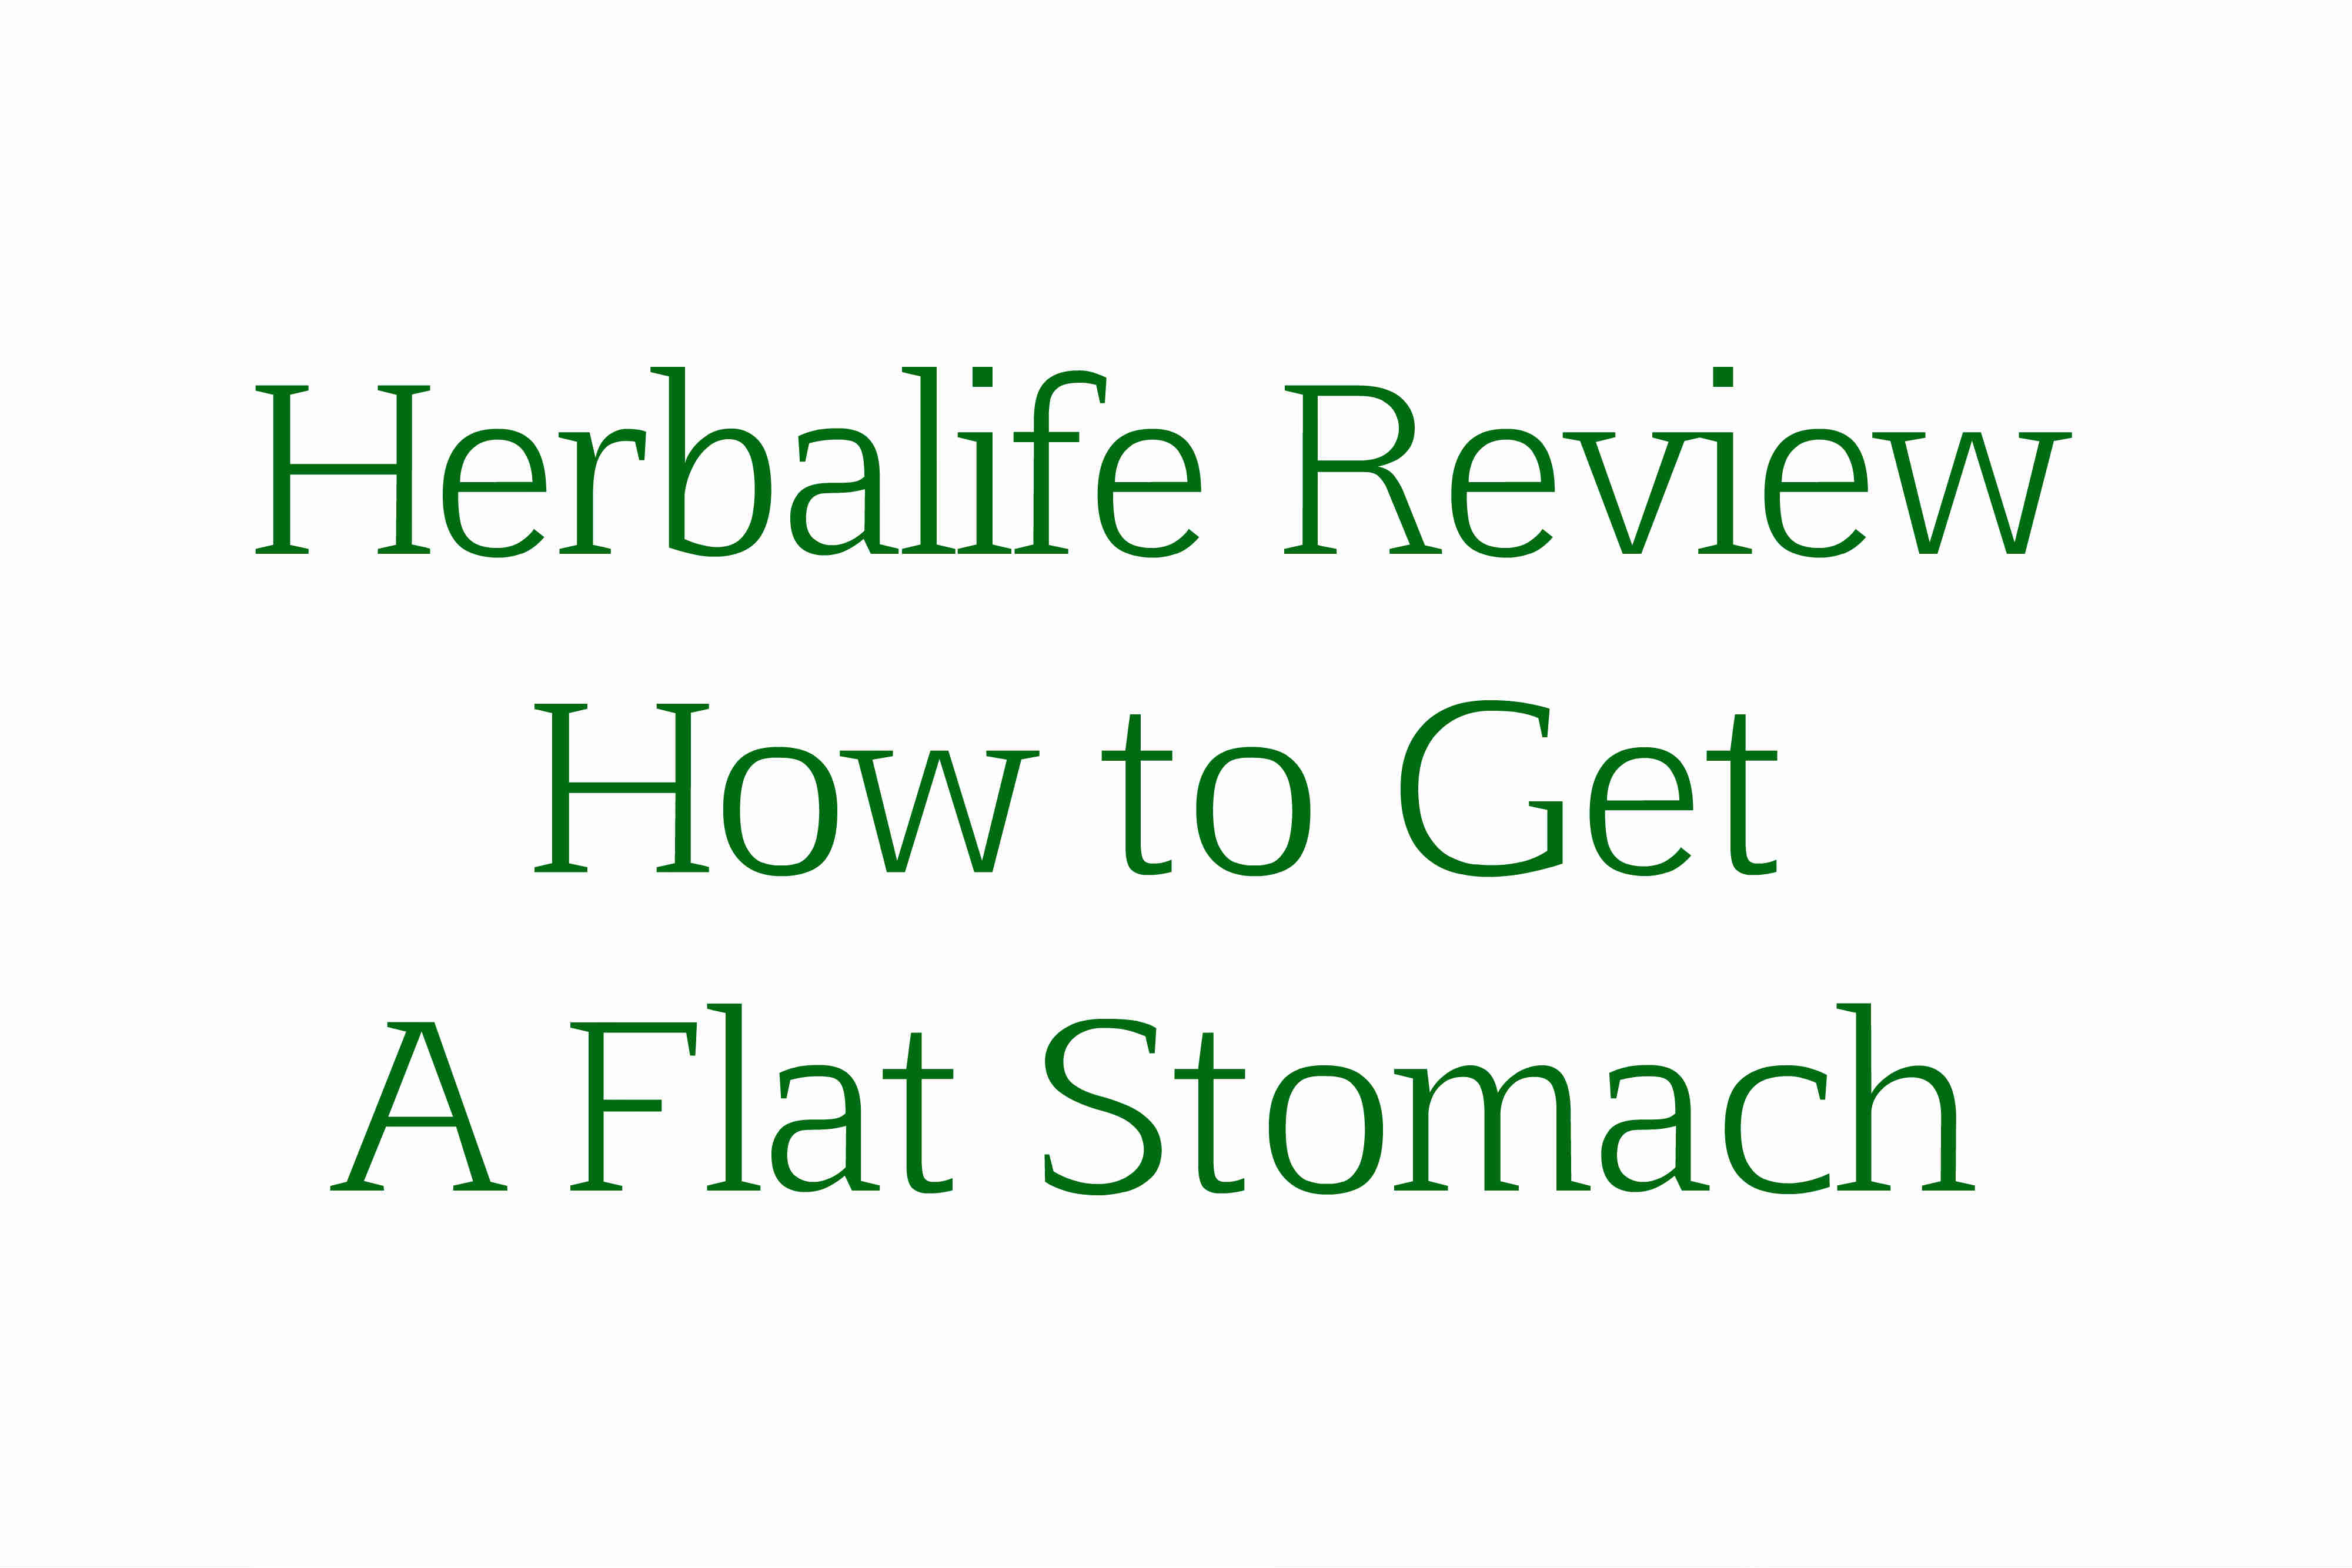 Herbalife Review How to Get A Flat Stomach